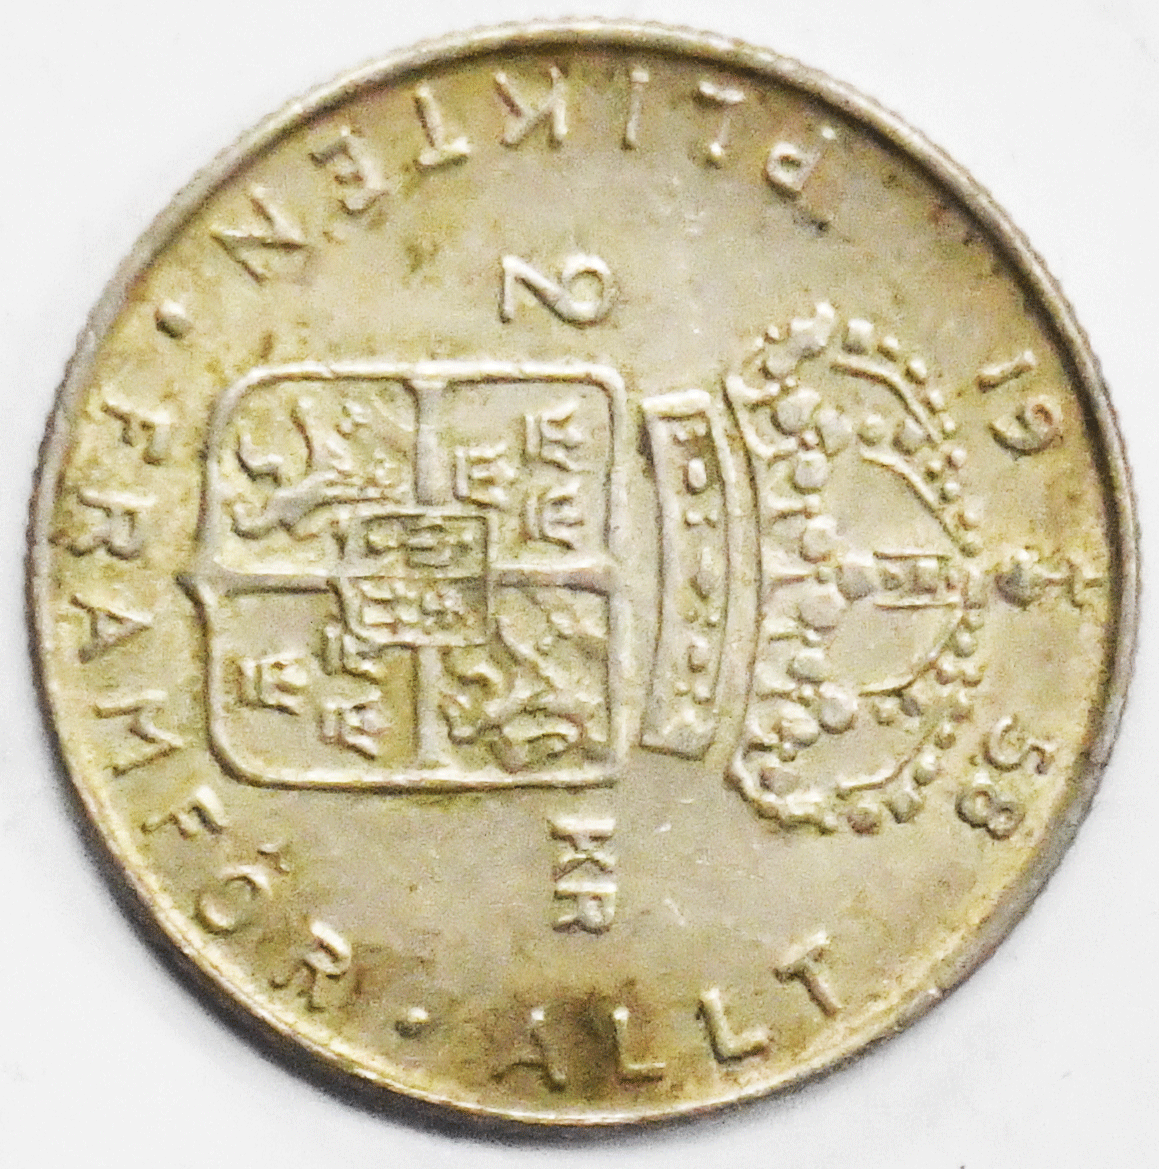 1958 TS Sweden 2 Two Kronor Silver Coin KM# 827